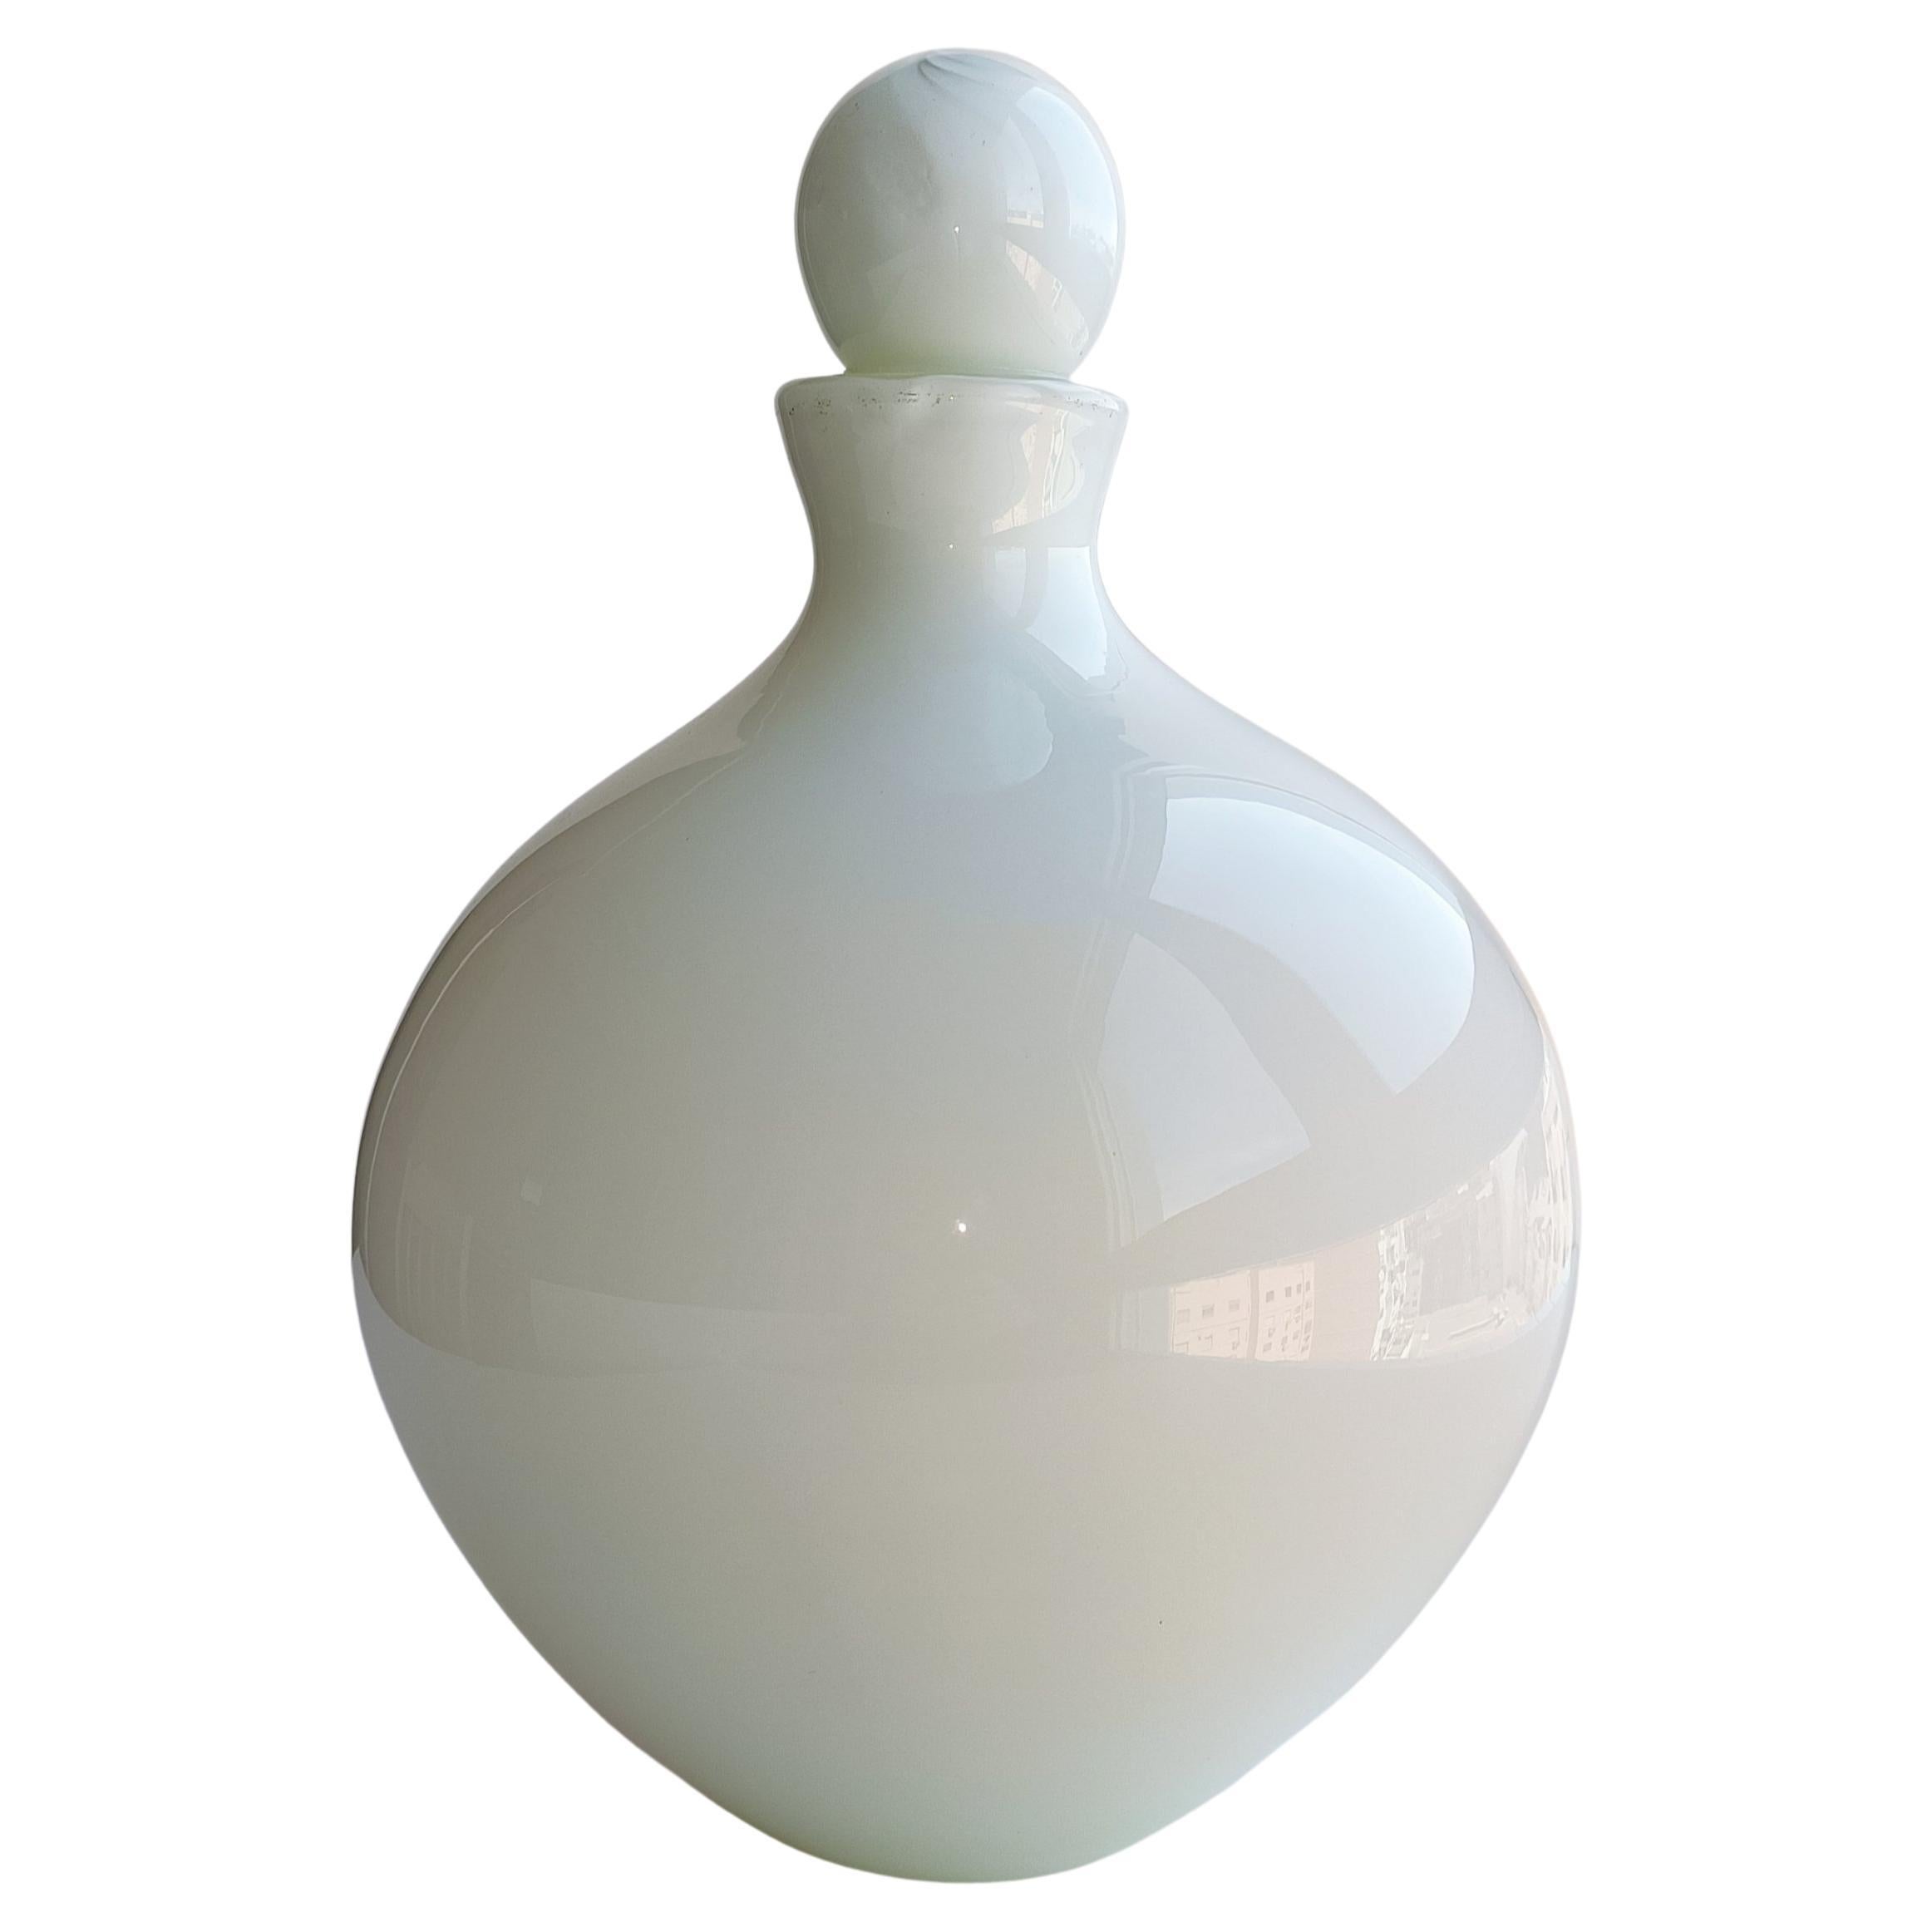 A stunning Mid Century French style Murano glass huge bottle in a pearl white color with a fabulous volume and design line, attributed to Formia Murano, the prestigious Italian Murano glass house. Hand-blown in Venice, Italy, circa the Mid Century